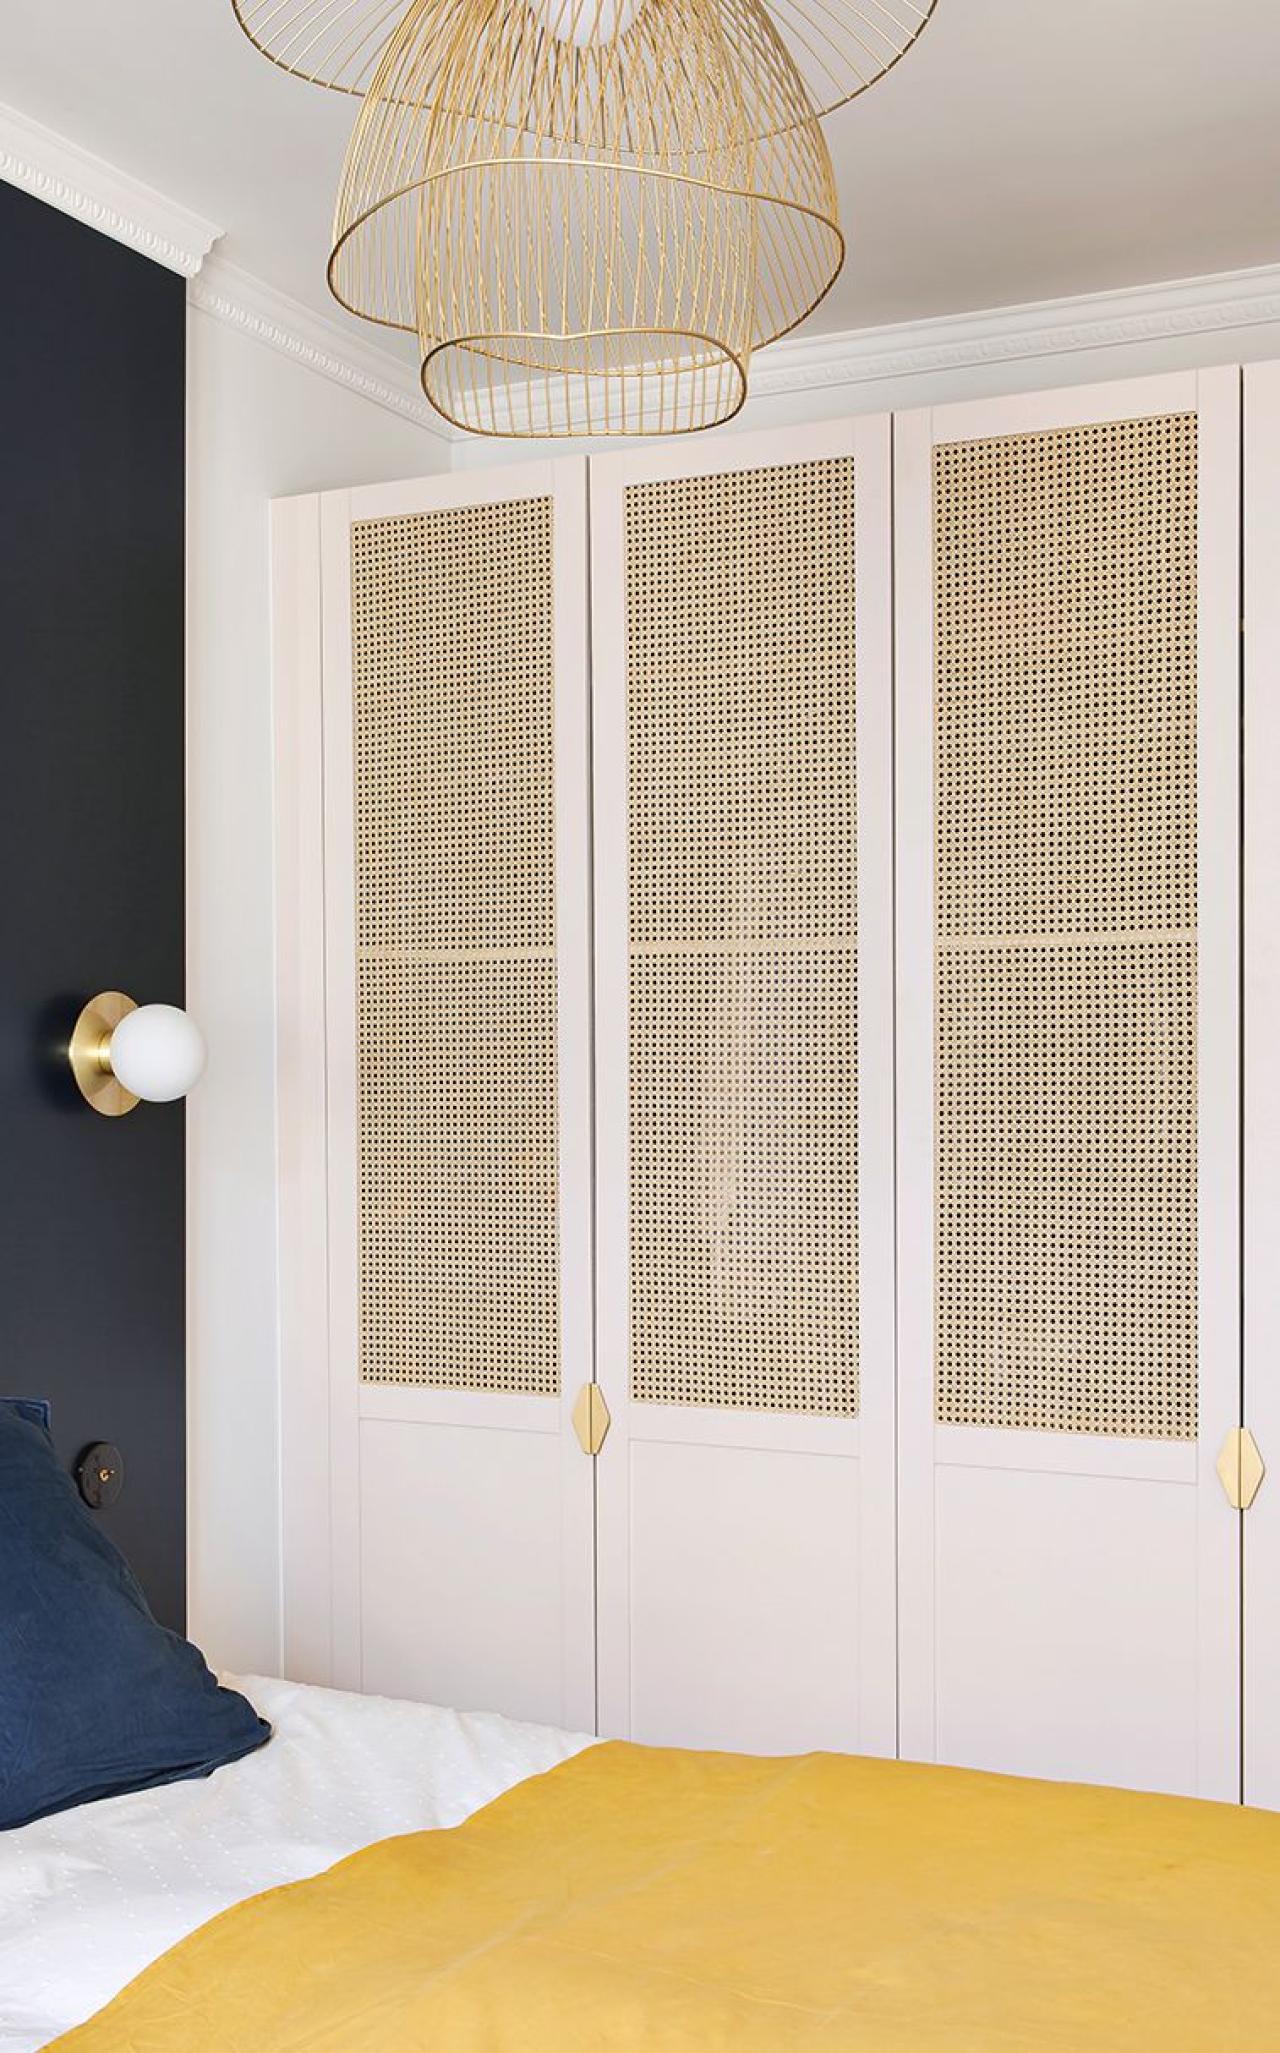 A cane wardrobe by Space Factory